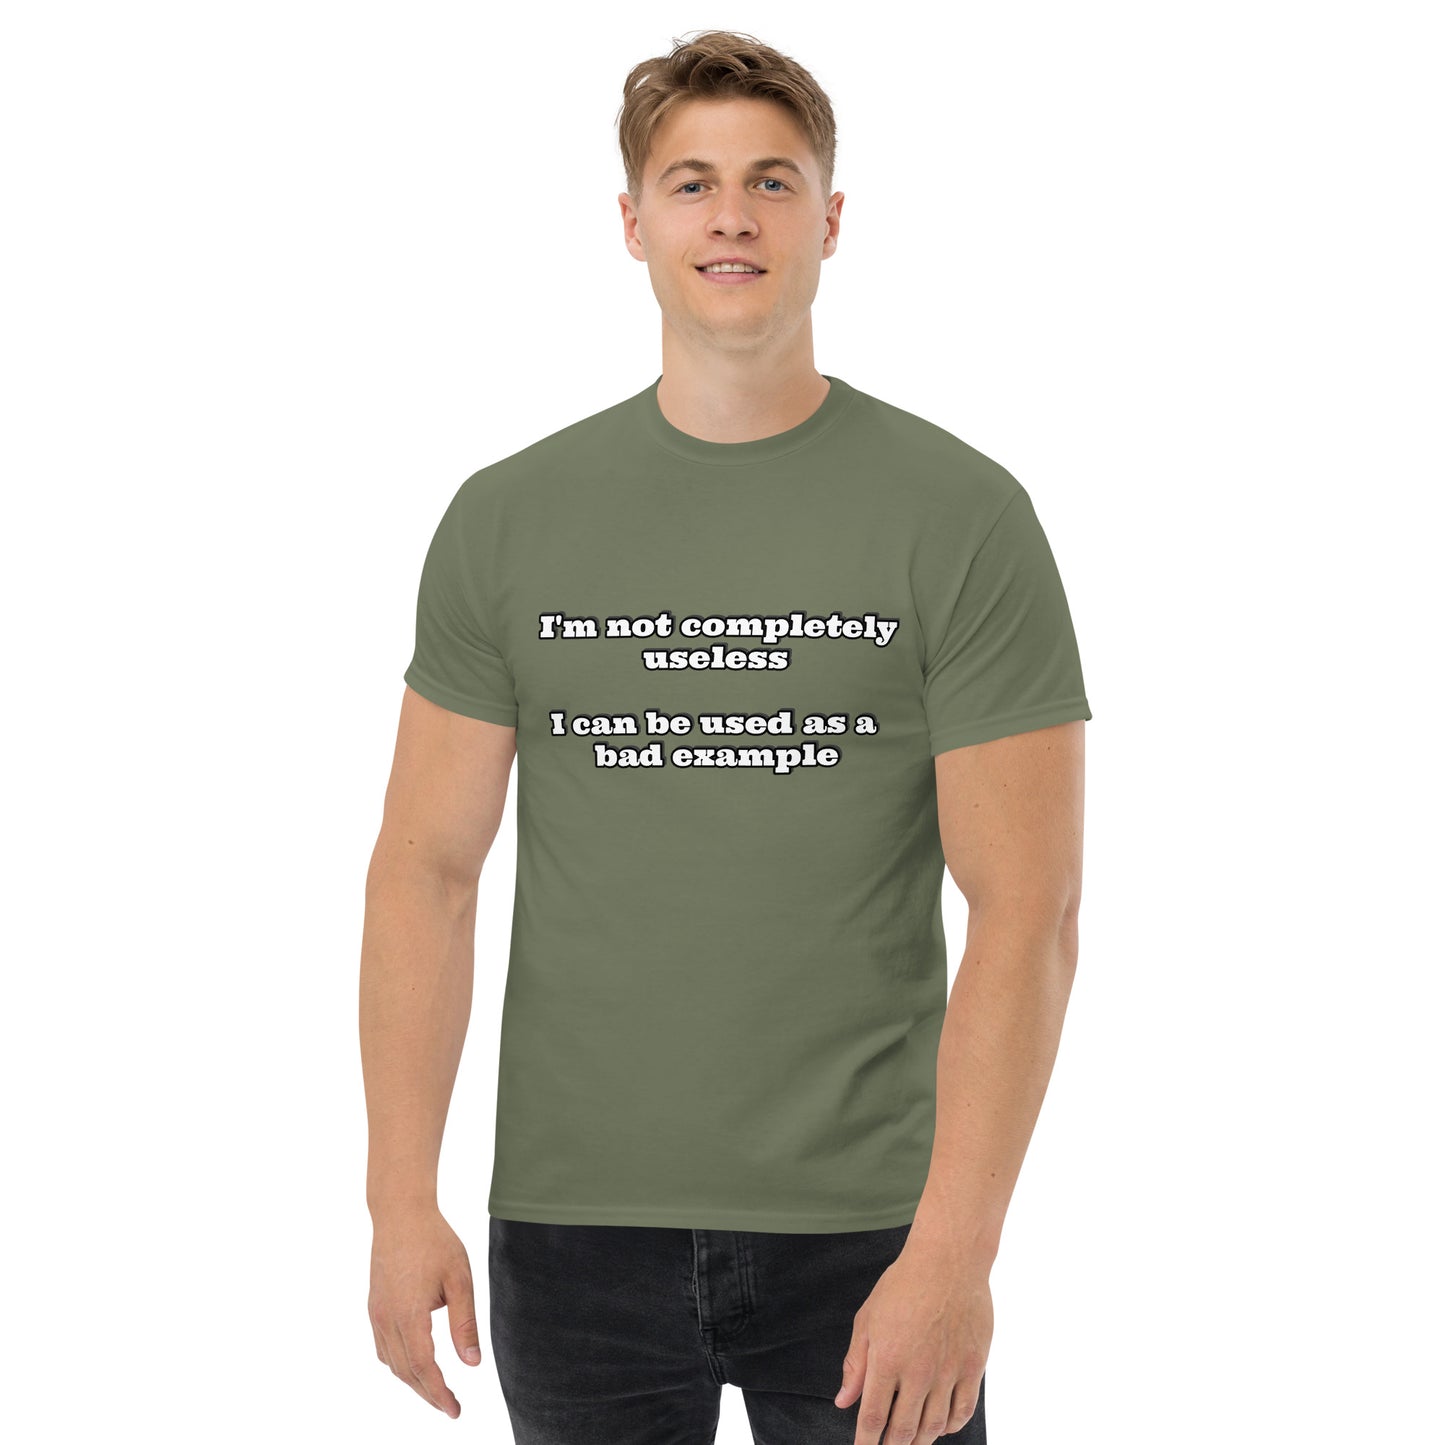 Men with military green t-shirt with text “I'm not completely useless I can be used as a bad example”